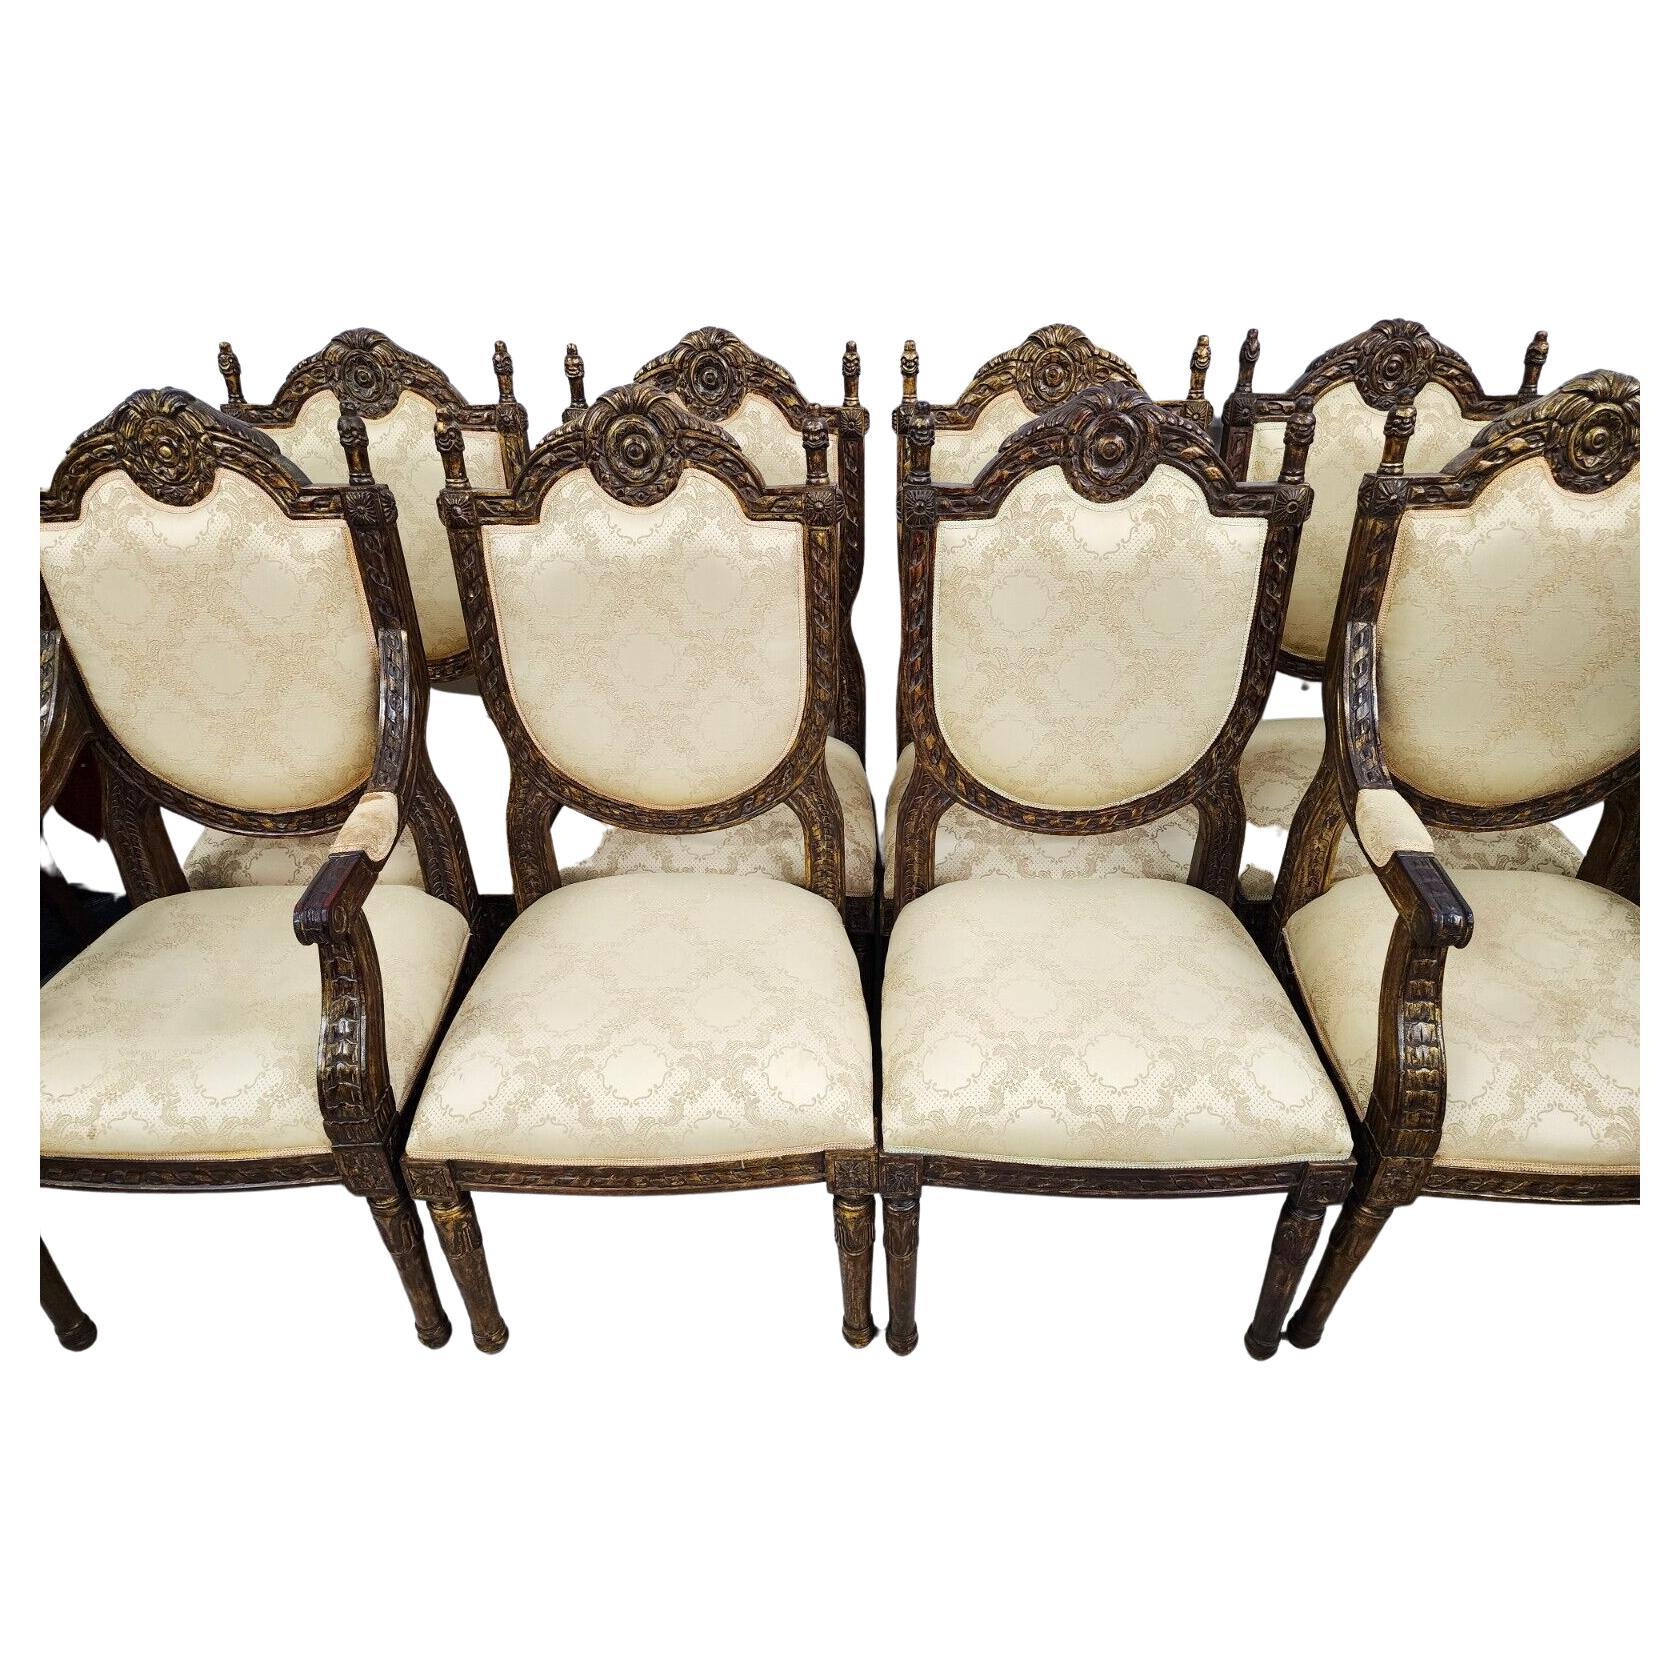 For FULL item description click on CONTINUE READING at the bottom of this page.

Offering one of our recent palm beach estate fine furniture acquisitions of a
set of 8 french Louis XV style dining chairs 
With a giltwood finish.
Set includes 2